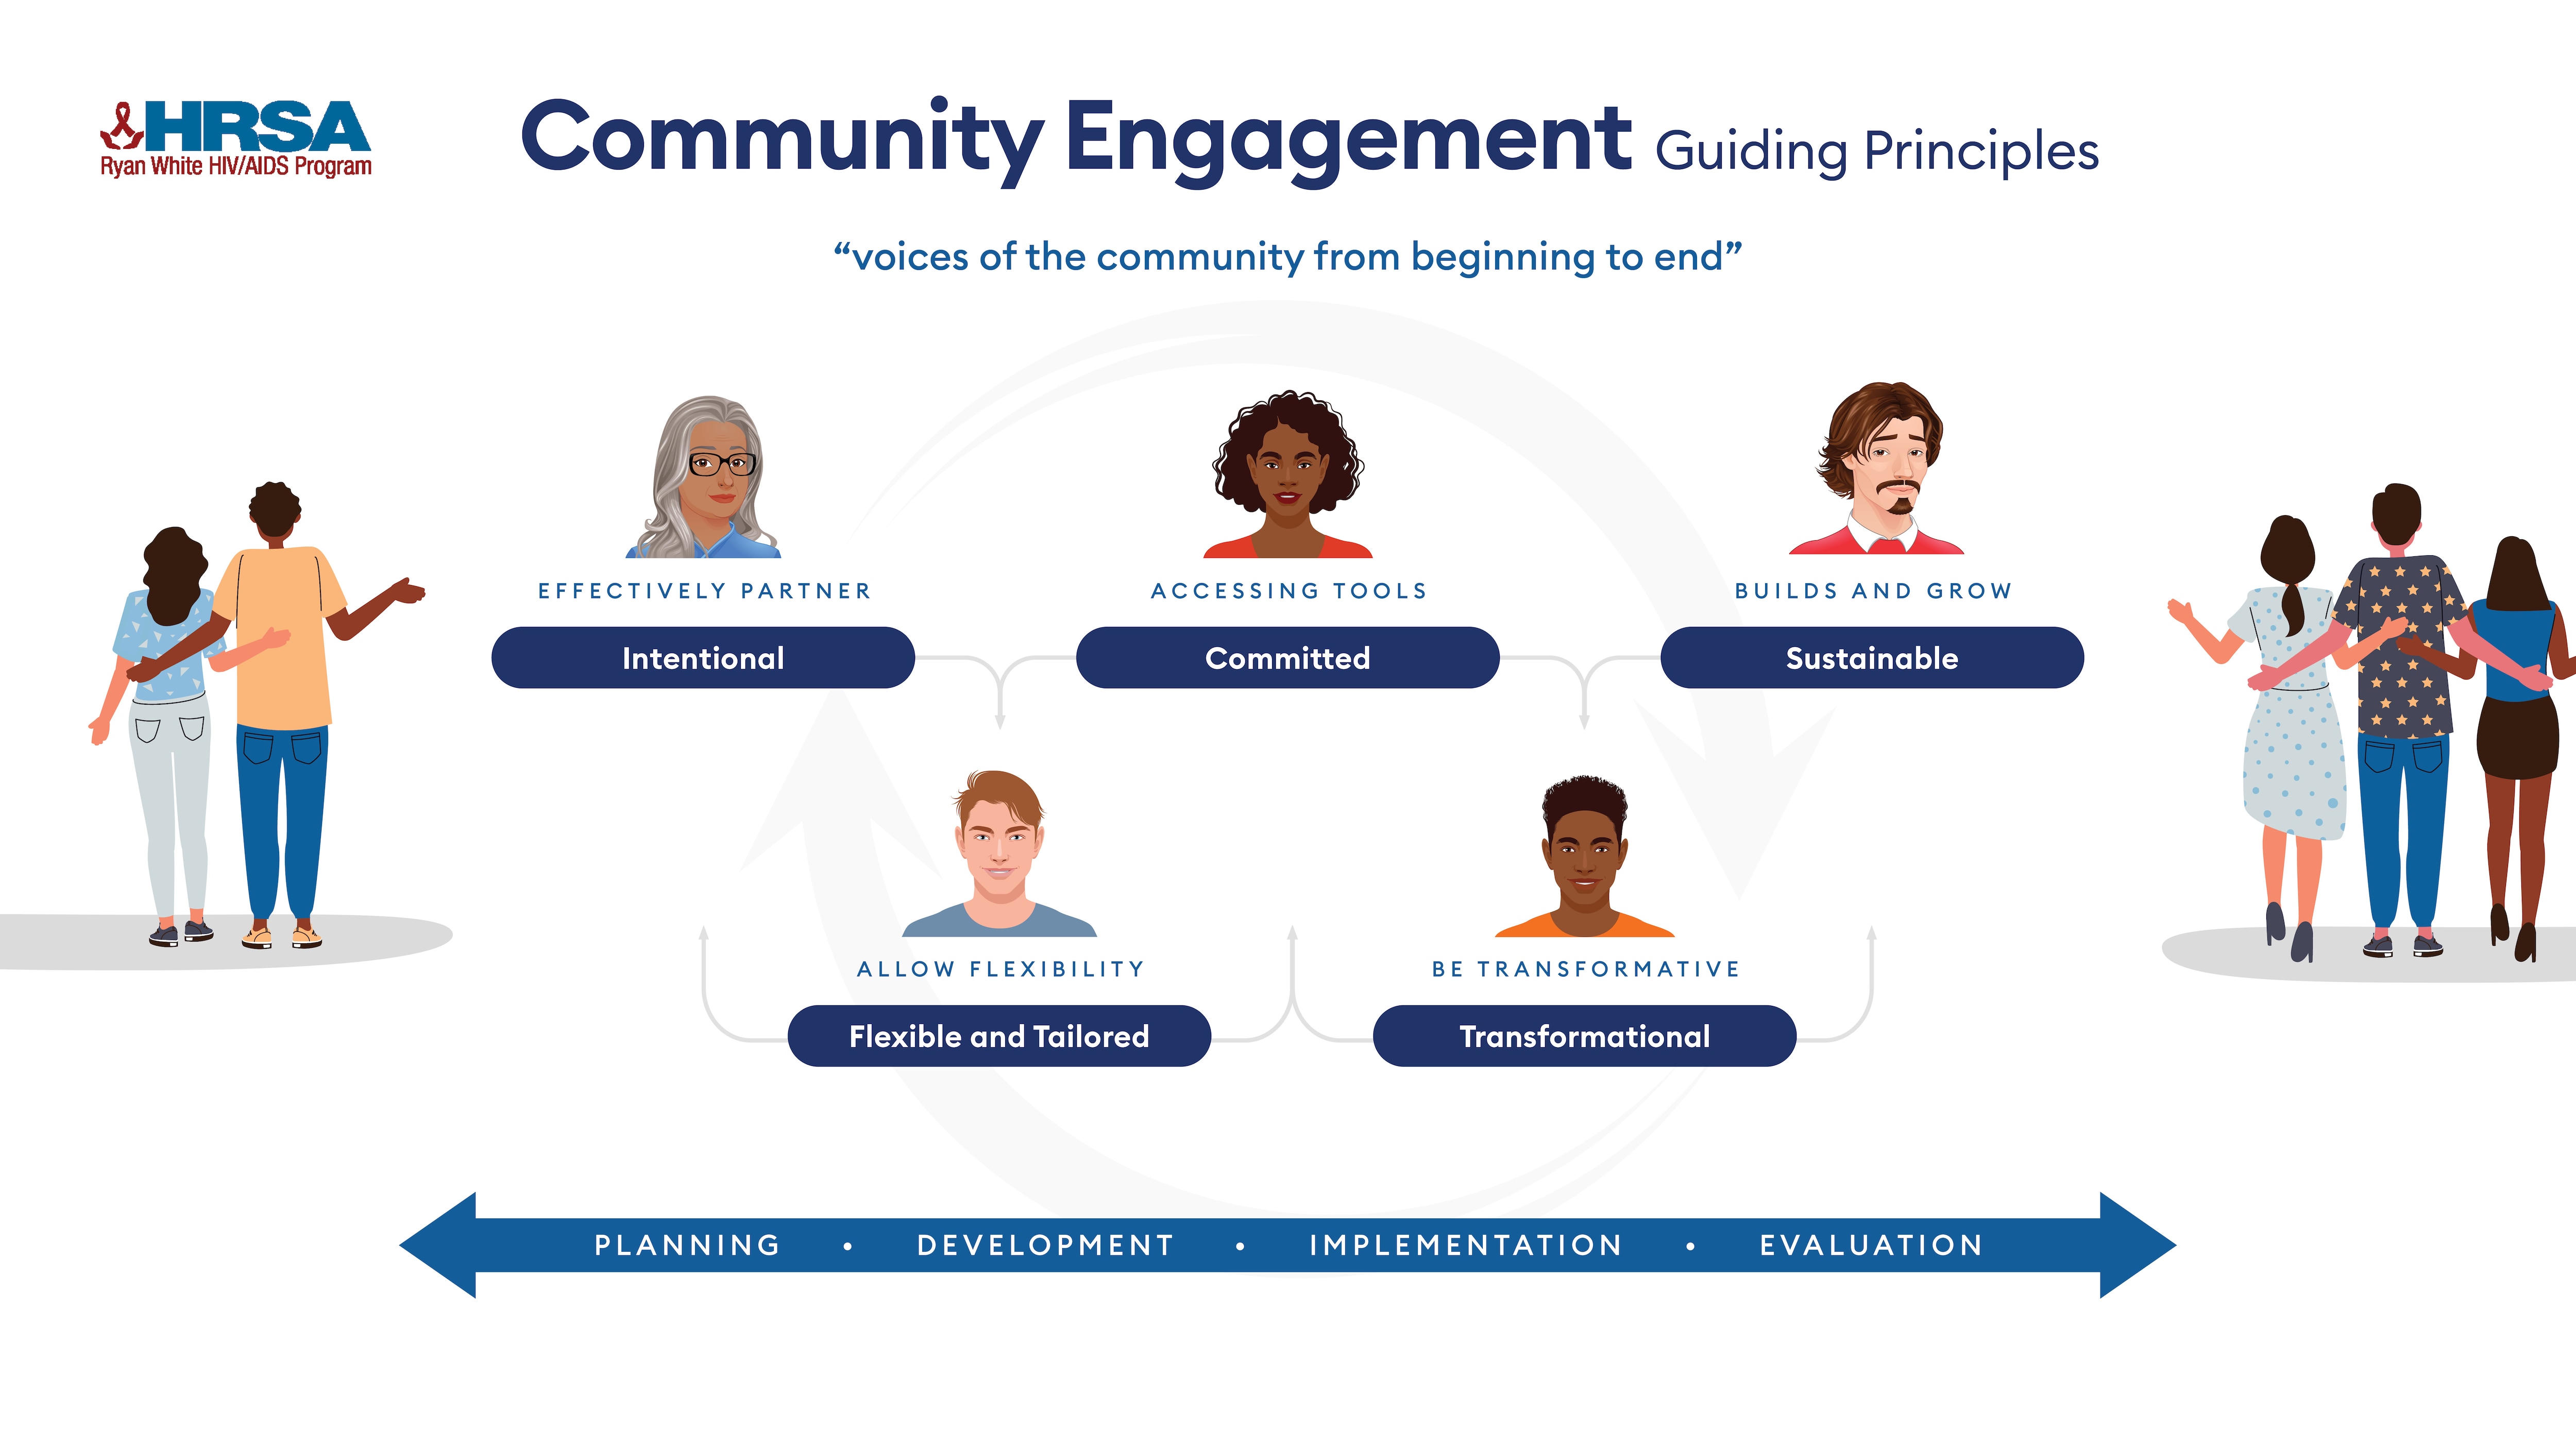 Community engagement guiding principles includes voices of the community from beginning to end and involves partnering effectively and intentionally, committed to accessing tools, builds and grows to be sustainable, allows flexibility in tailoring, and being transformative. Community engagement also involves planning, development, implementation, and evaluation.